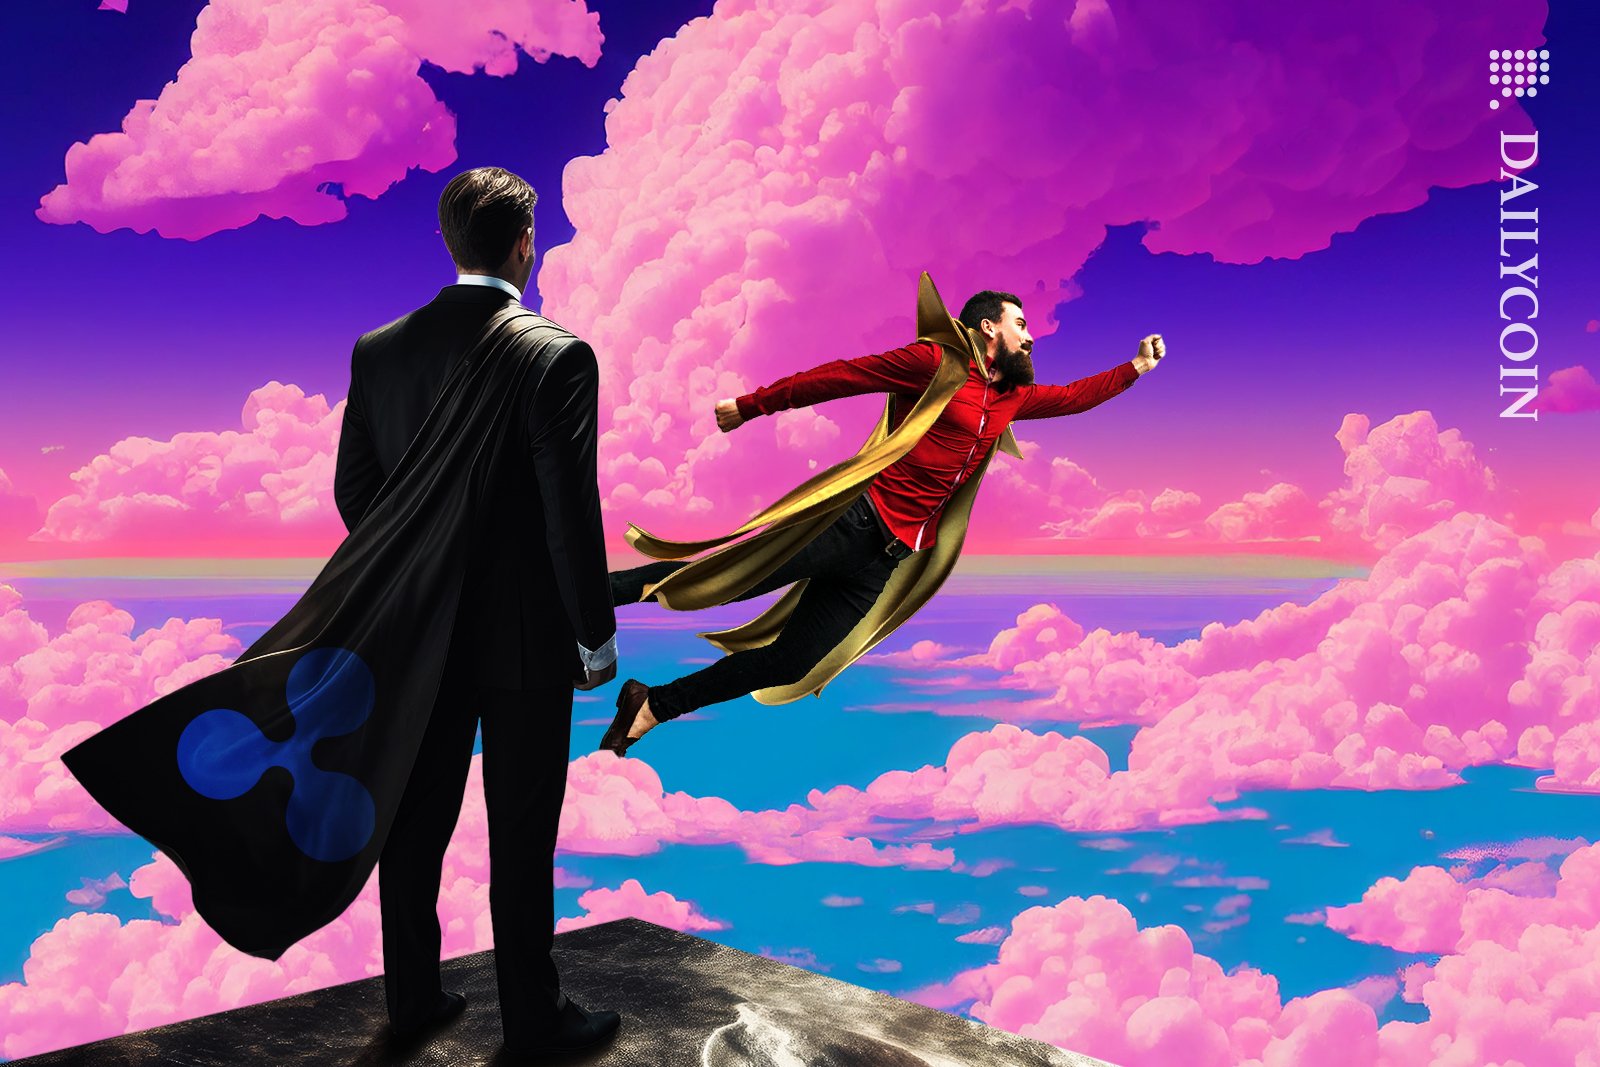 Business man with Ripple cape standing on the edge looking at another man with a cape flying through the sky.